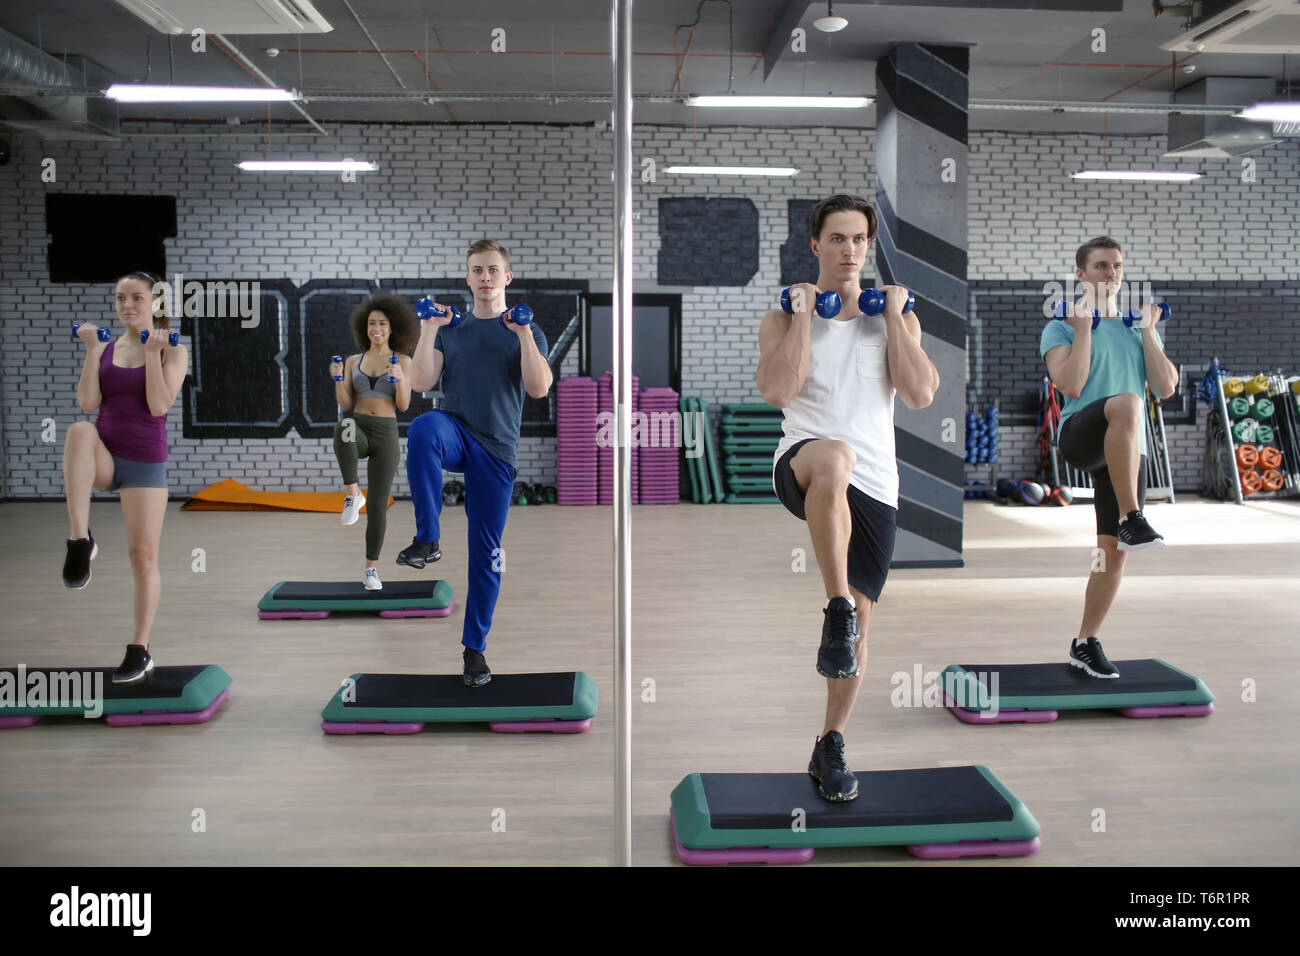 Group of young people working out with dumbbells and steppers in gym Stock Photo